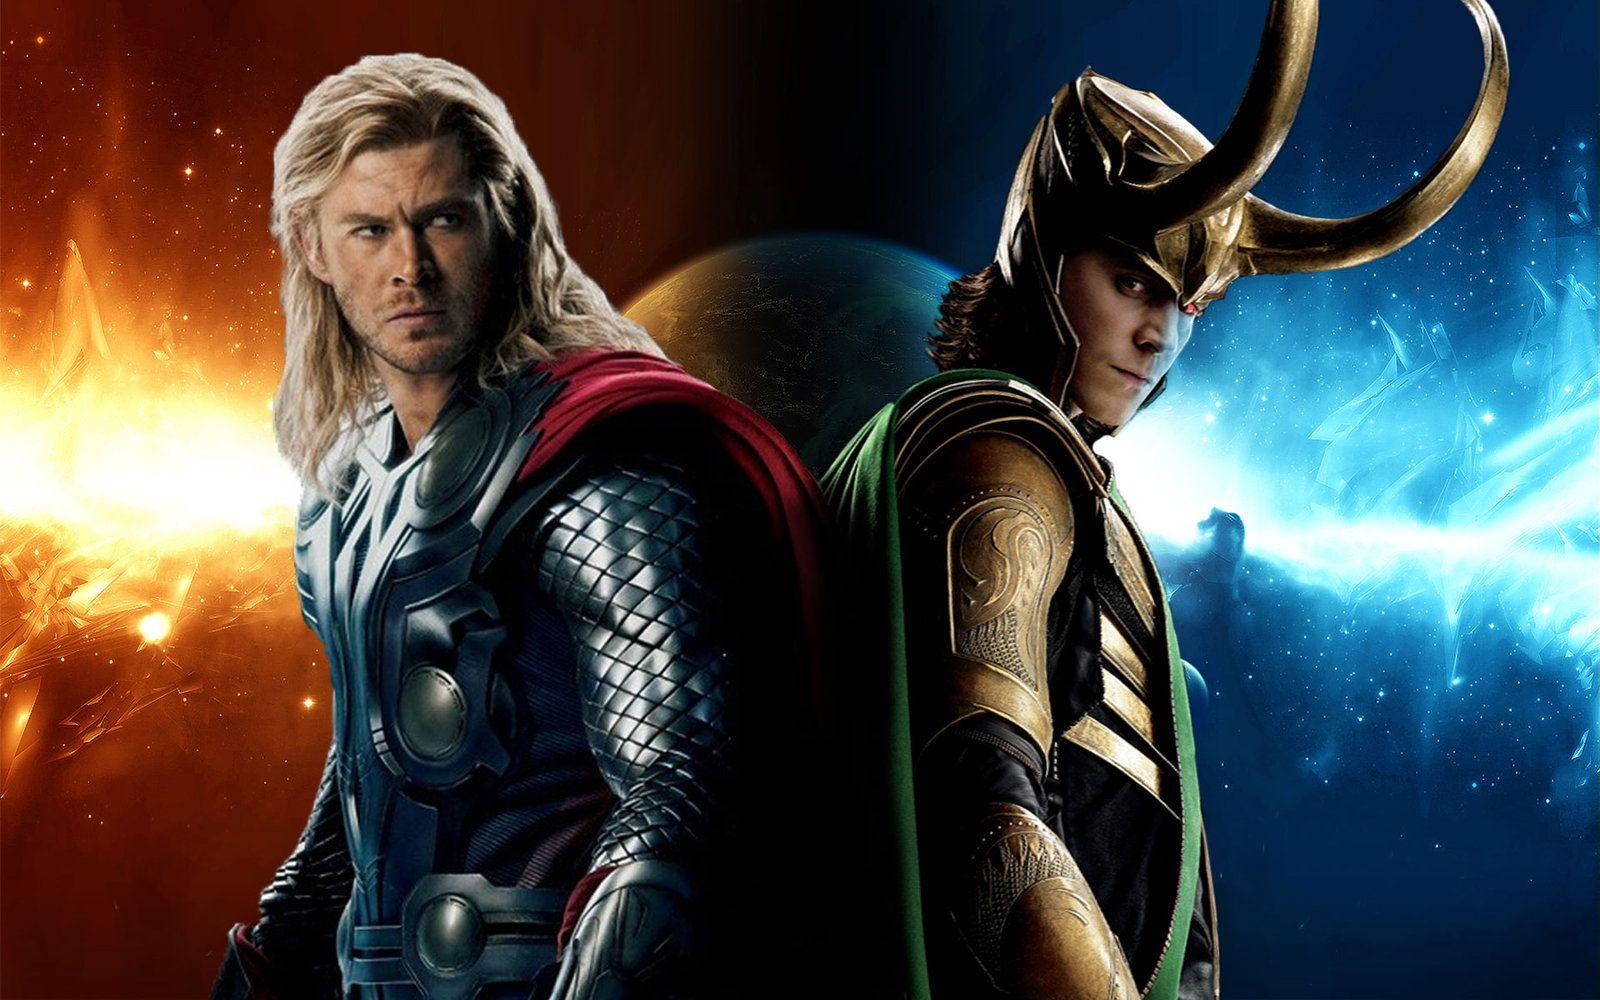 Thor and Loki: Brothers Wallpaper